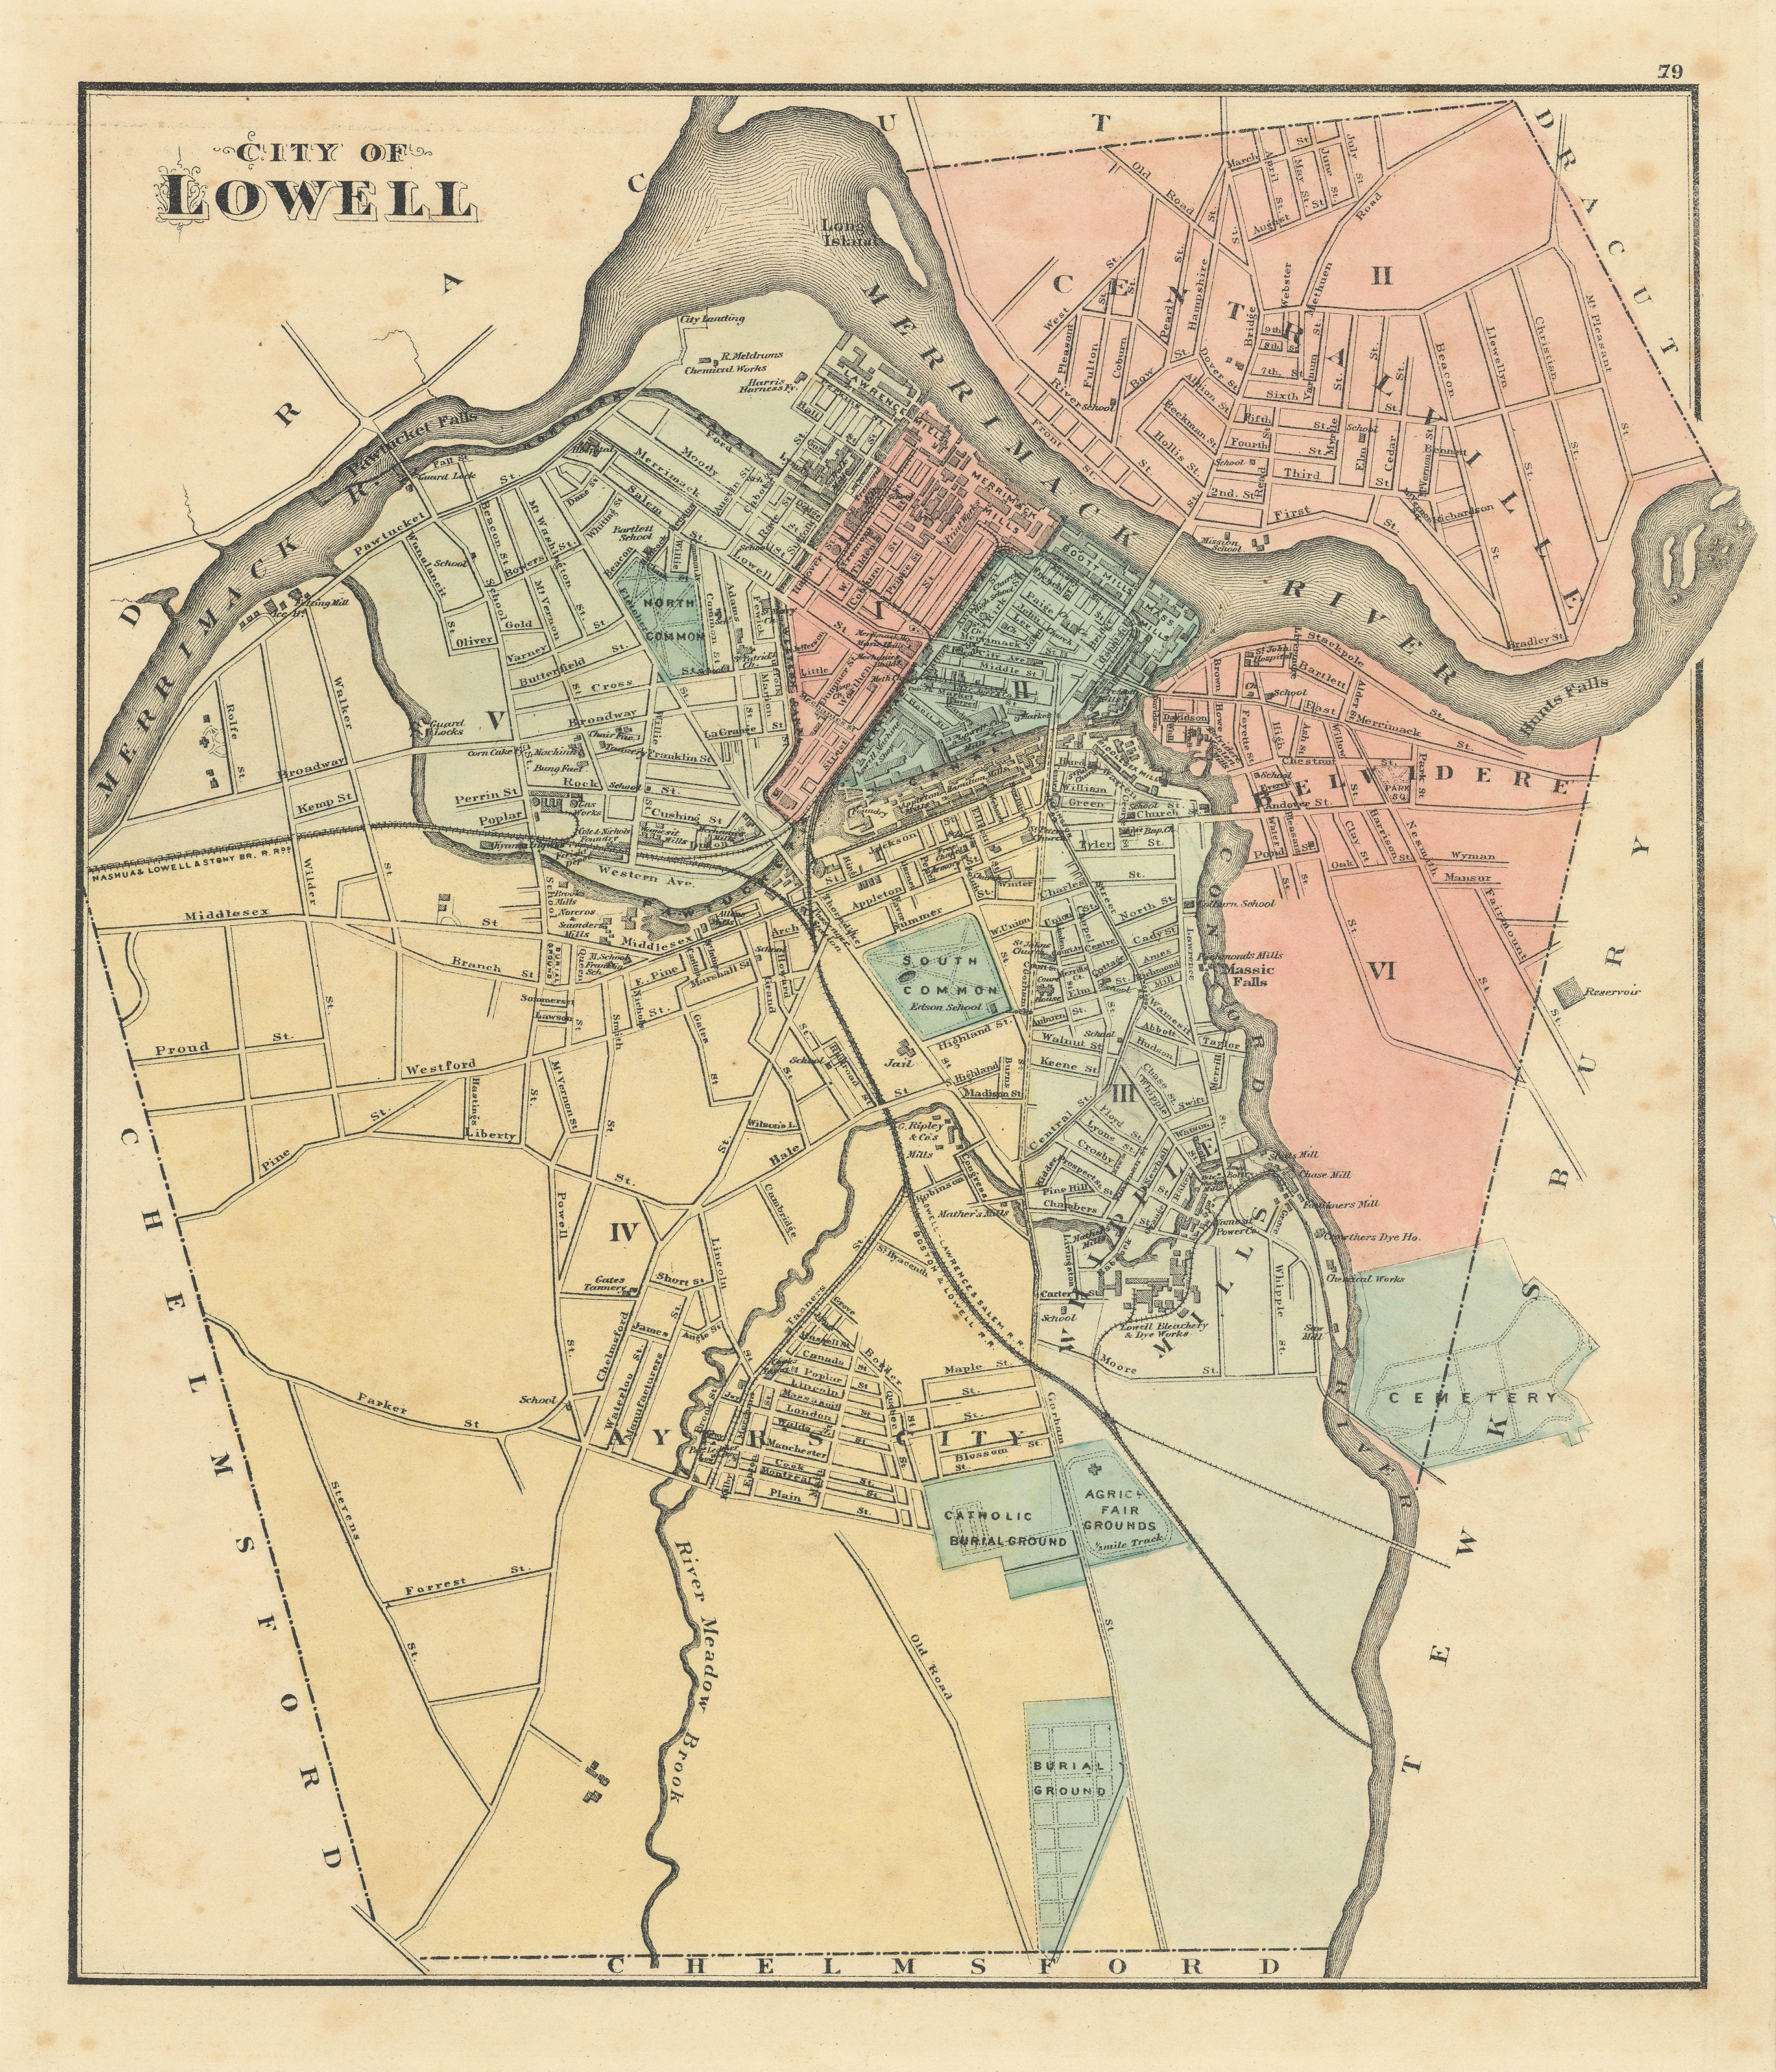 Associate Product City of Lowell, Massachusetts. Town plan. BAKER, WALLING & GRAY 1871 old map